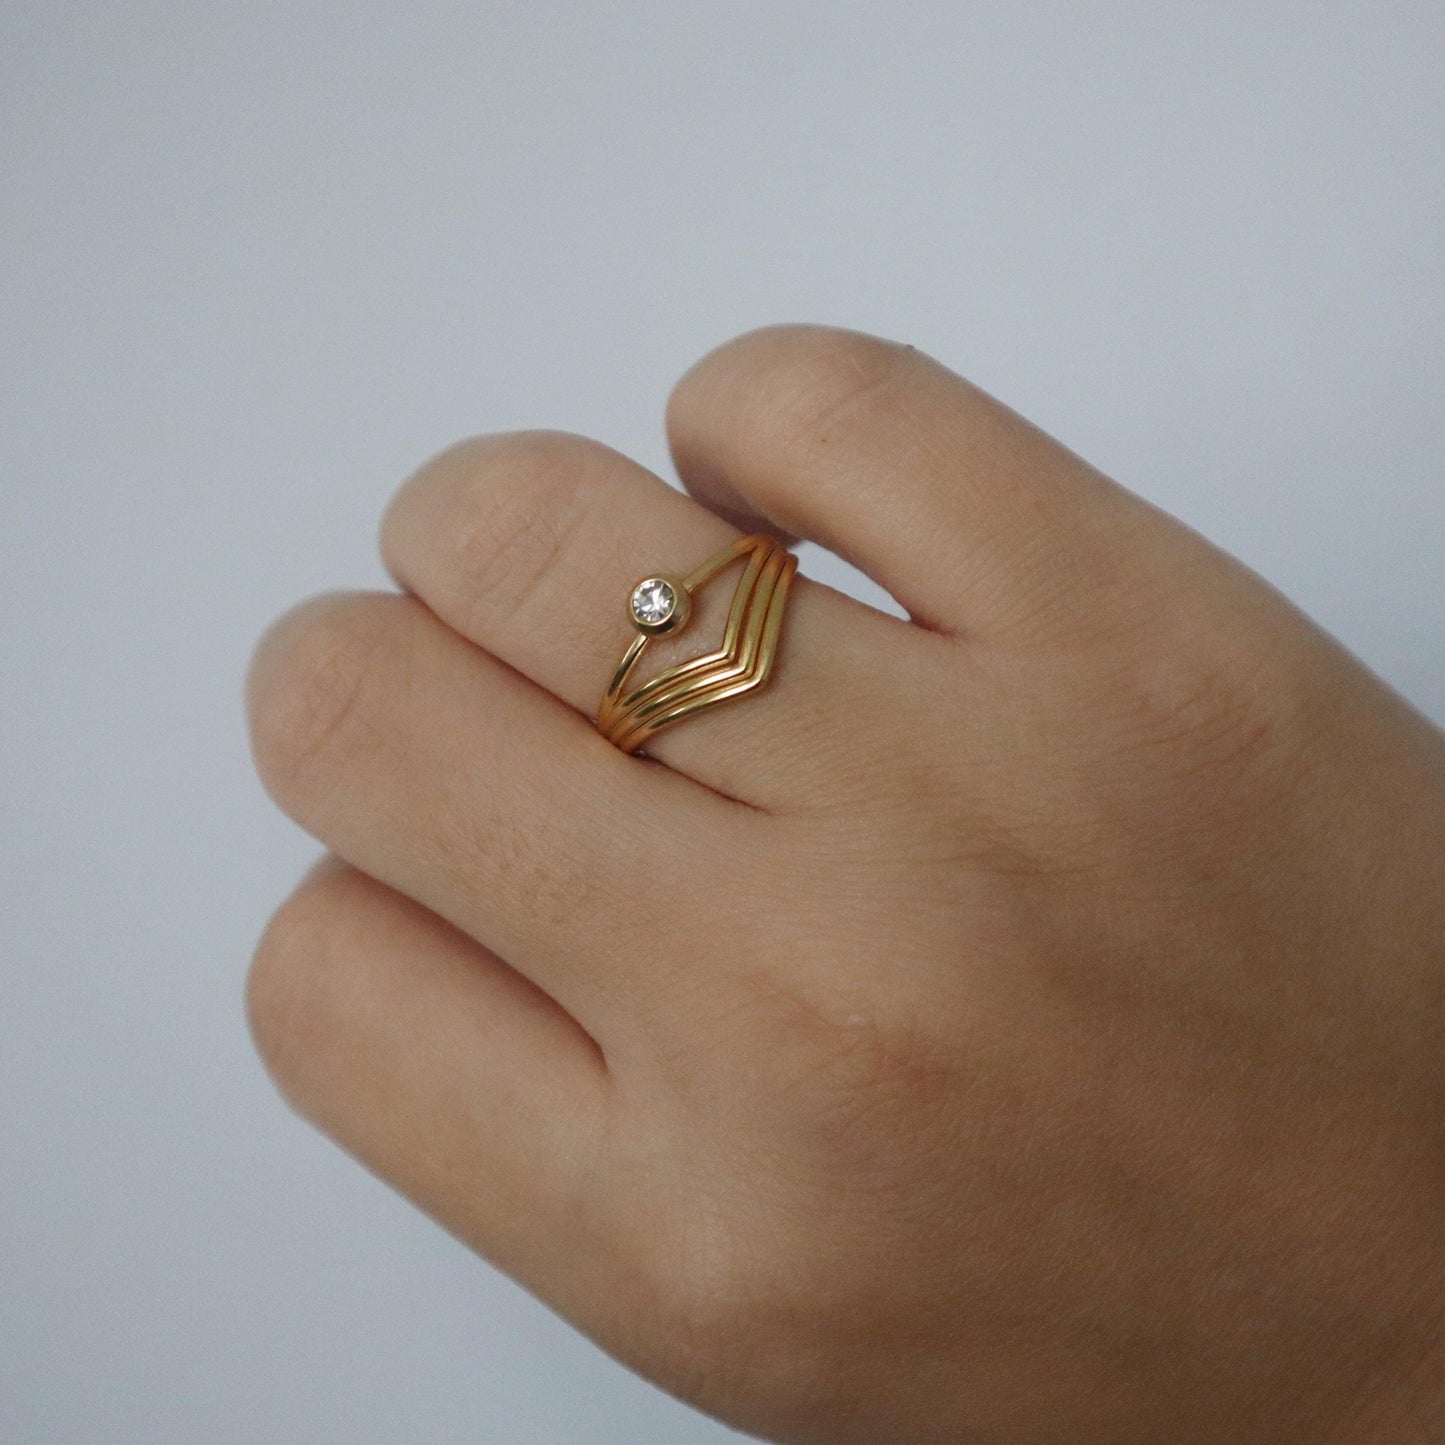 Vera Ring | Adjustable Ring - JESSA JEWELRY | GOLD JEWELRY; dainty, affordable gold everyday jewelry. Tarnish free, water-resistant, hypoallergenic. Jewelry for everyday wear